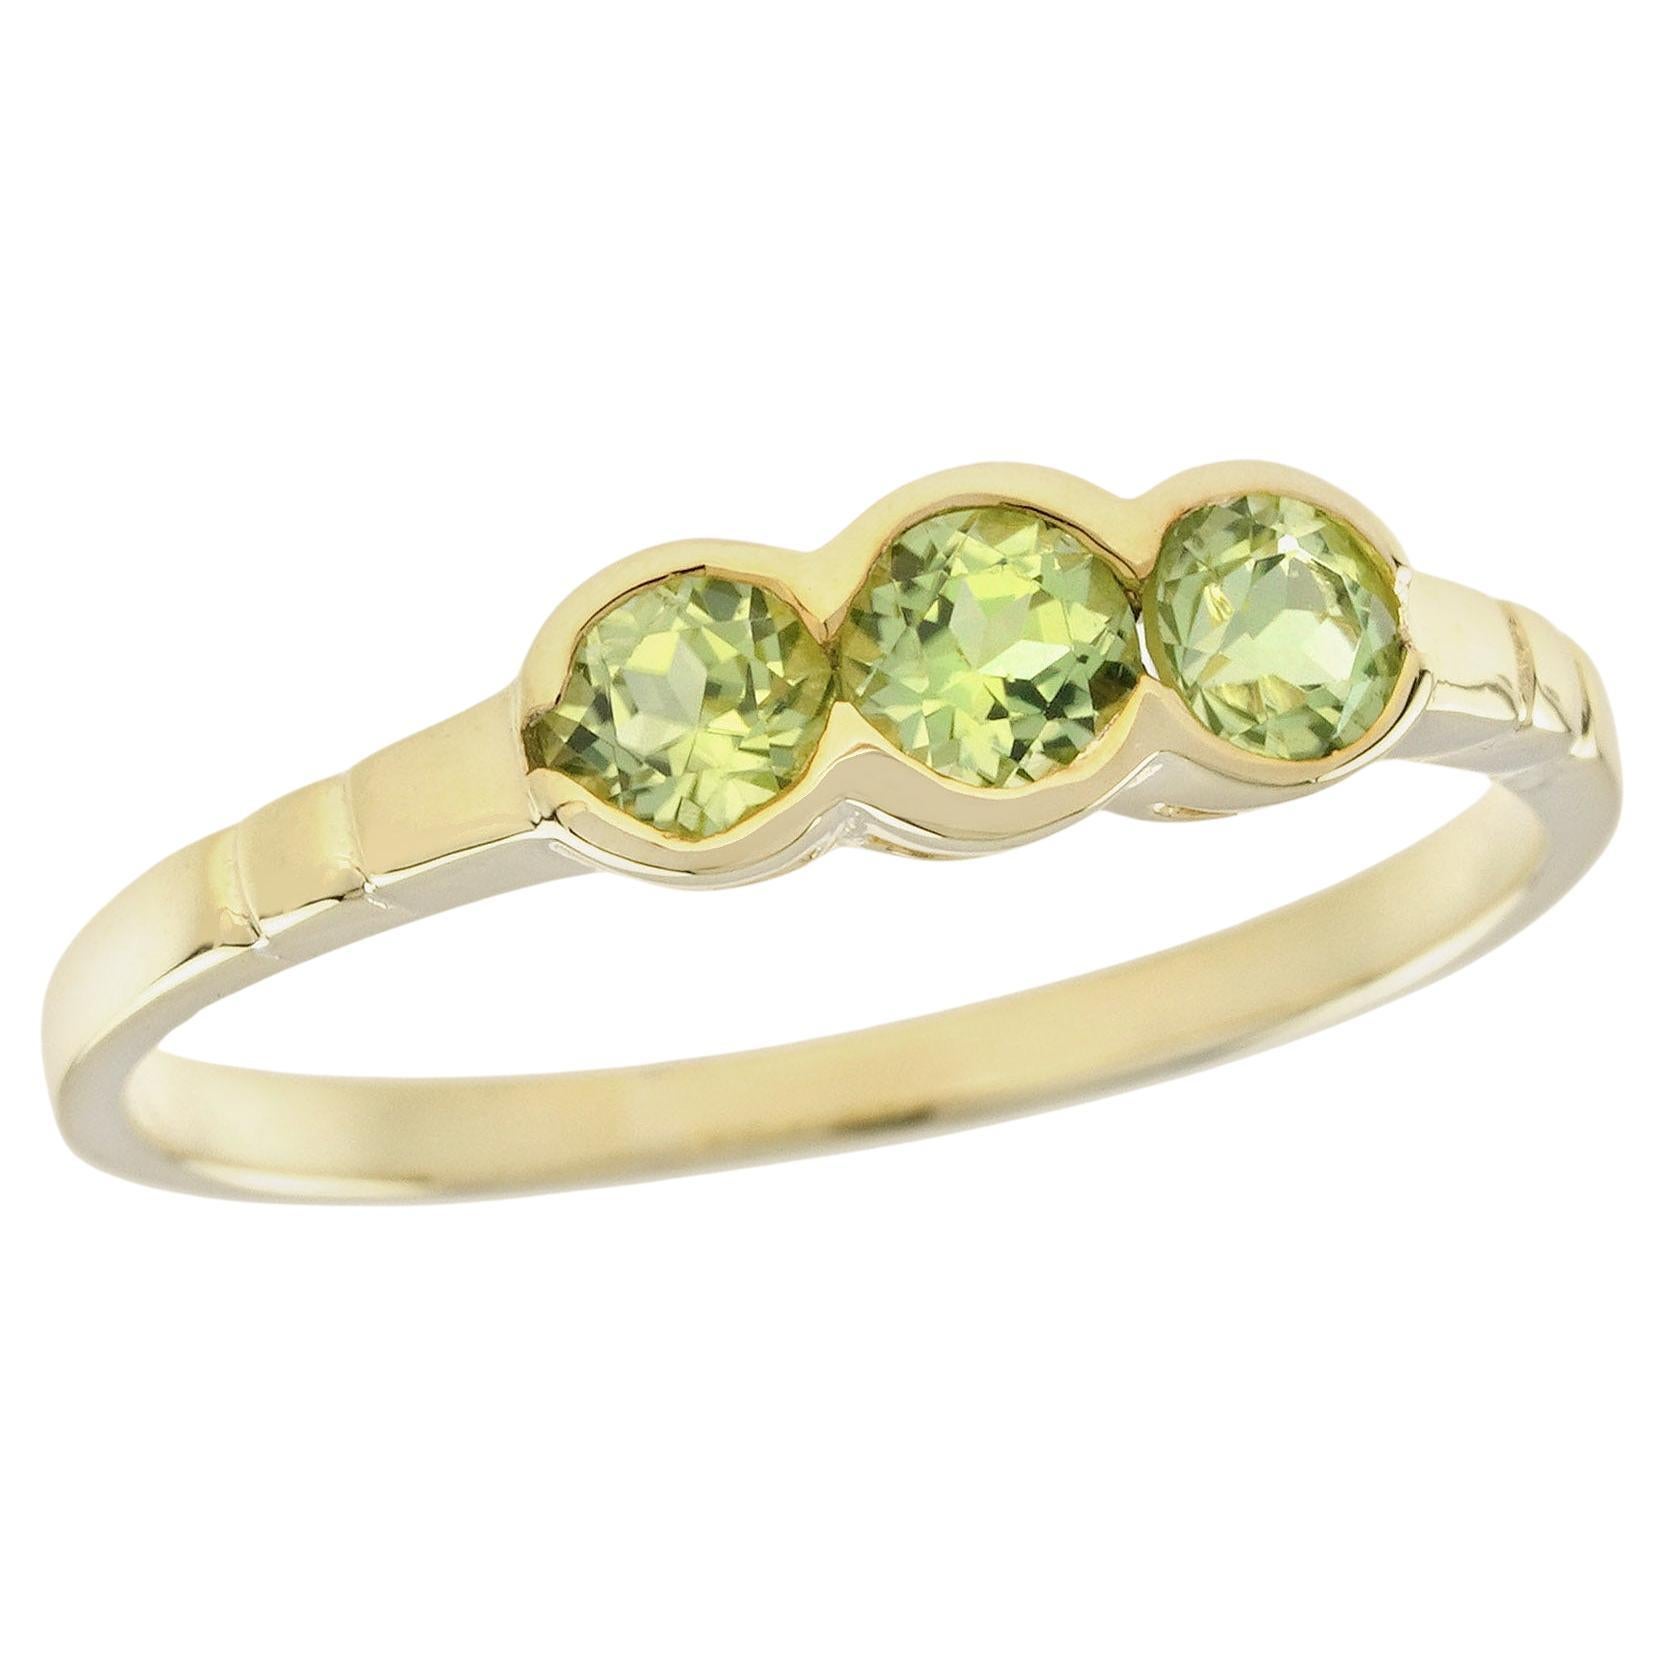 Natural Peridot Vintage Style Three Stone Ring in Solid 9K Yellow Gold